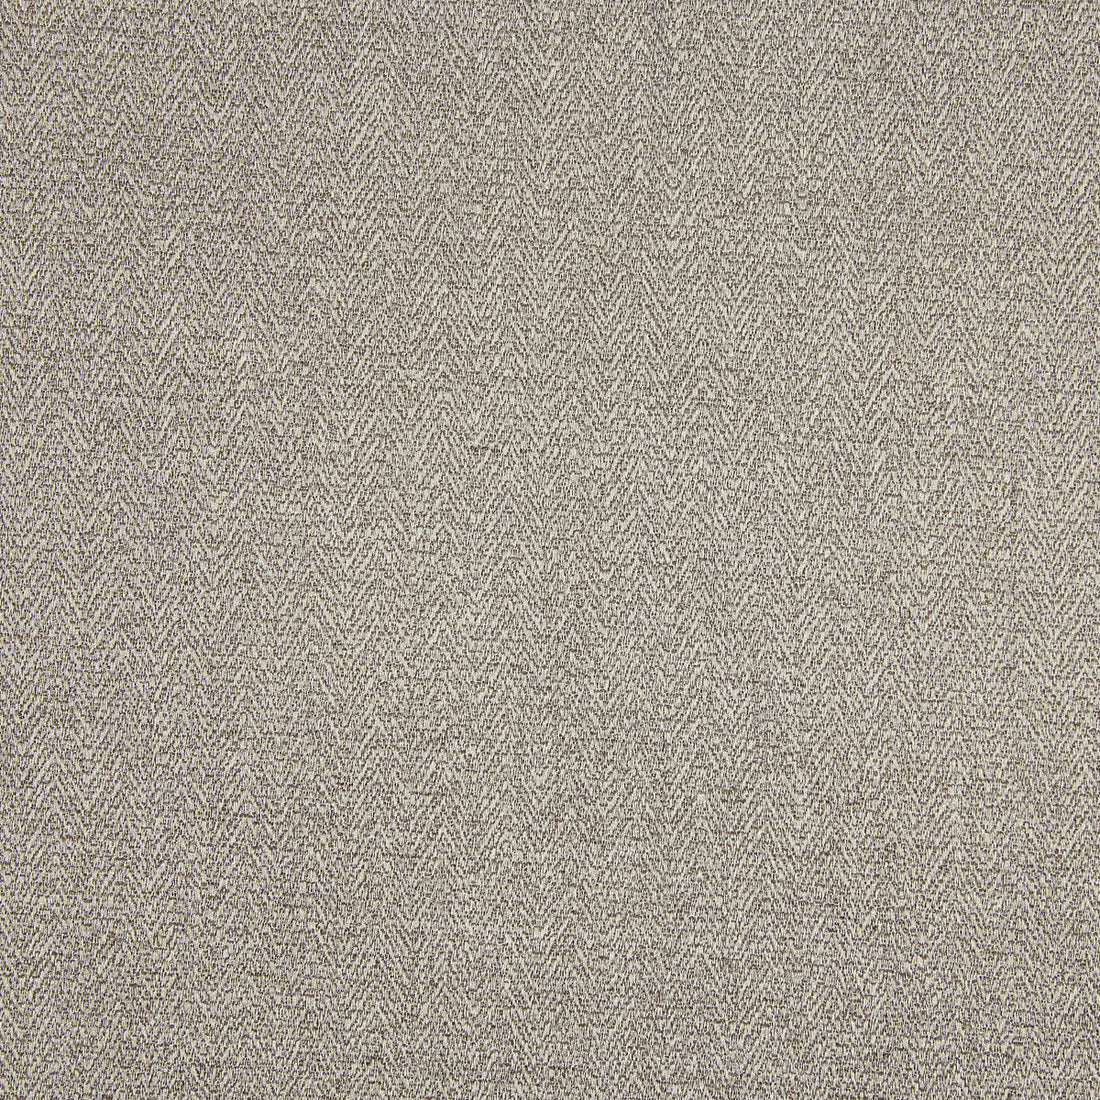 Brummell fabric in 6 color - pattern LZ-30363.06.0 - by Kravet Design in the Lizzo collection